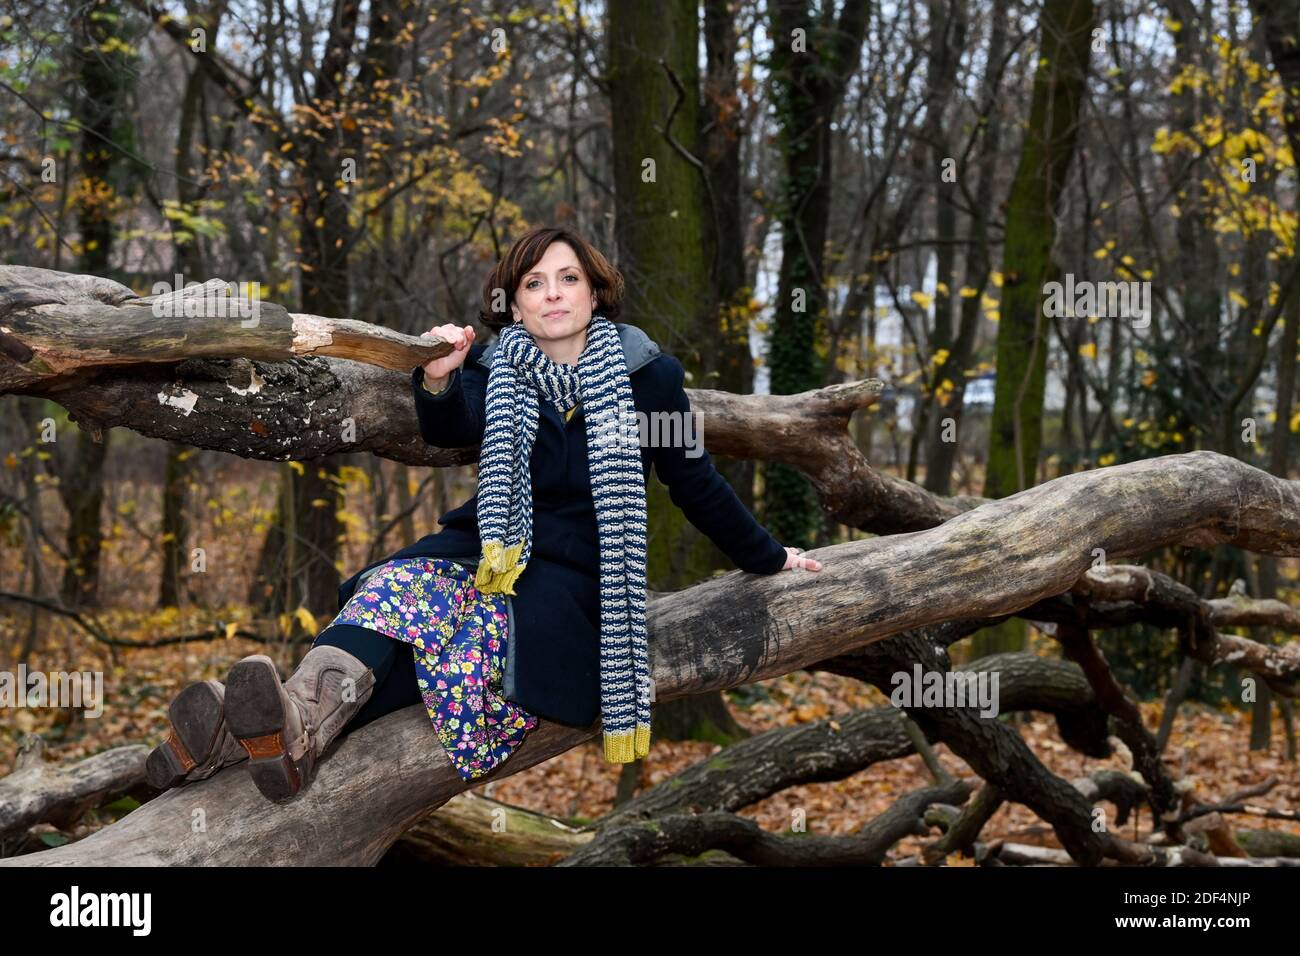 Berlin, Germany. 30th Nov, 2020. The actress Julia Brendler during a walk in the park Schönholzer Heide in Niederschönhausen She plays the leading role in the film of the ZDF series 'Katie Fforde: Emma's Secret', which will be broadcast on 06.12.2020 at 20.15. She is also known from the ZDF crime series 'Nord Nord Mord'. Credit: Jens Kalaene/dpa-Zentralbild/ZB/dpa/Alamy Live News Stock Photo